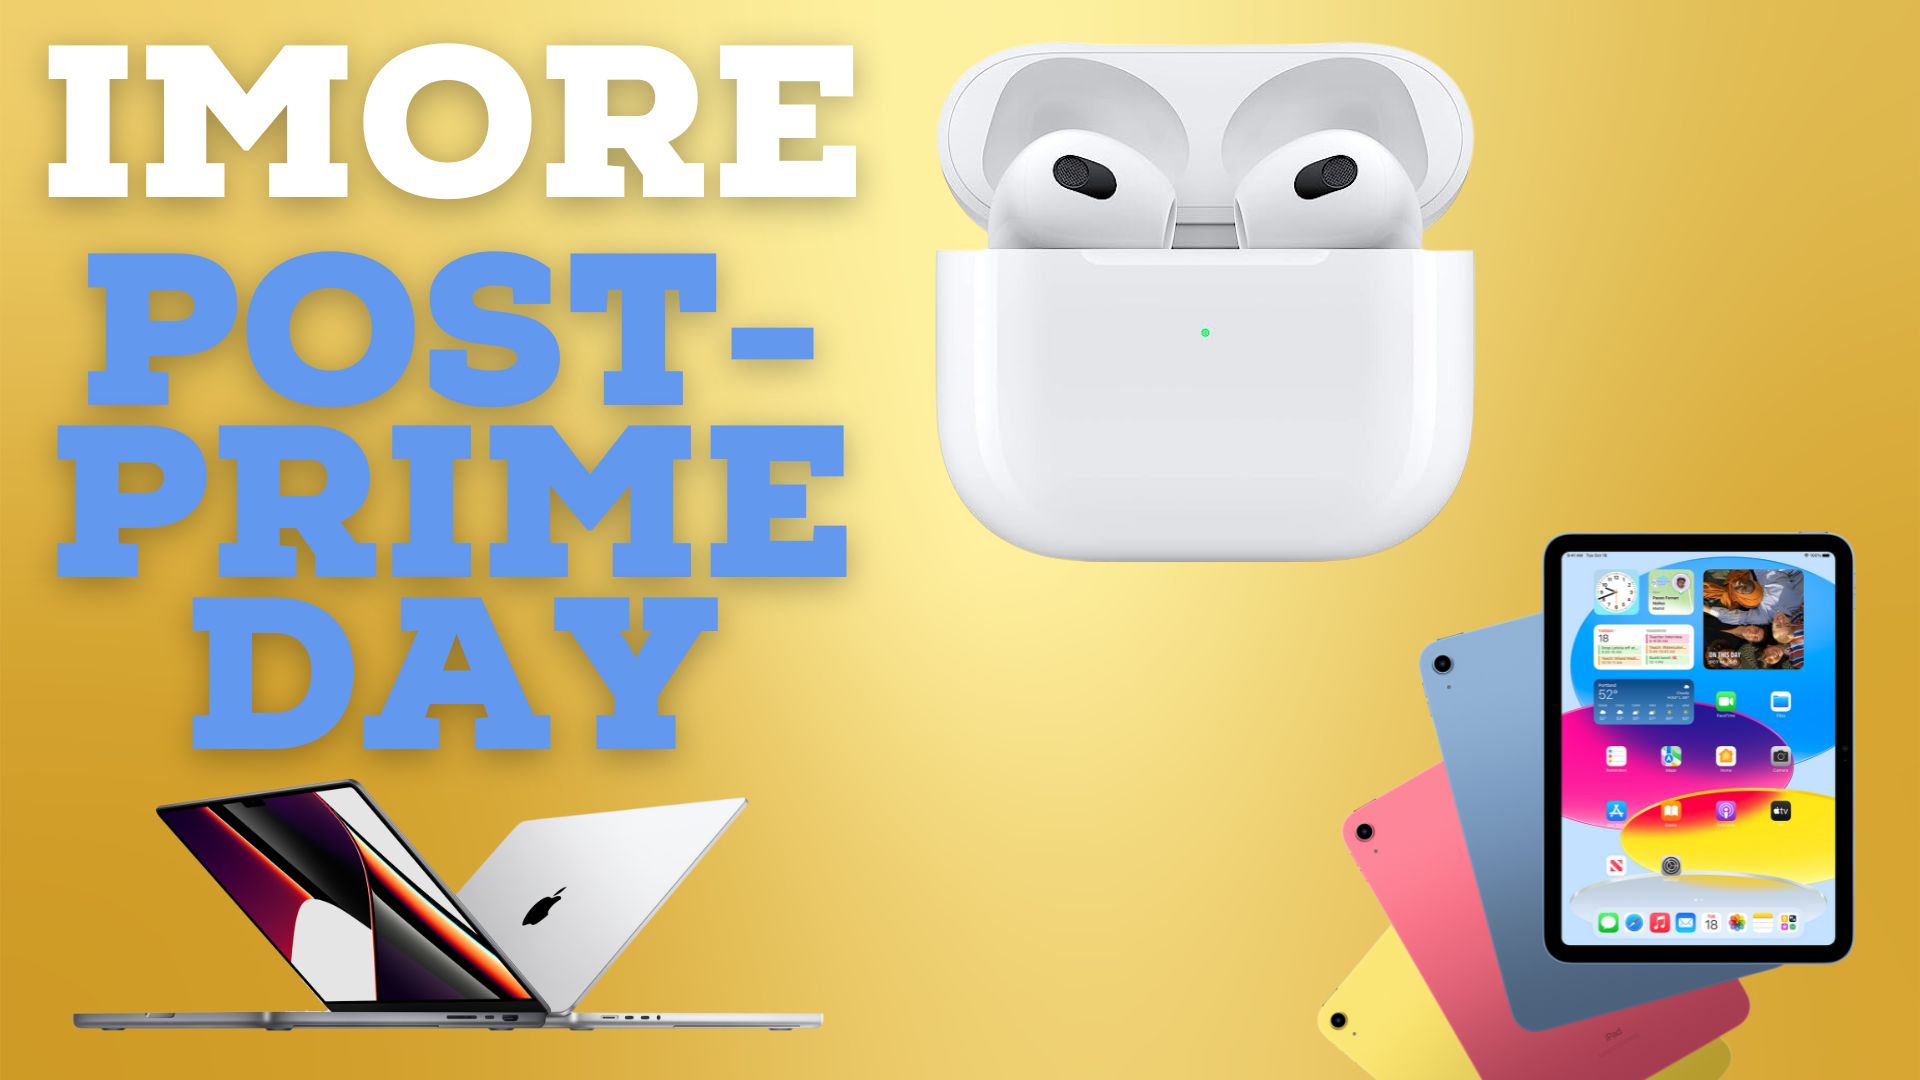 Prime Day may be over, but there are still some incredible Apple Deals